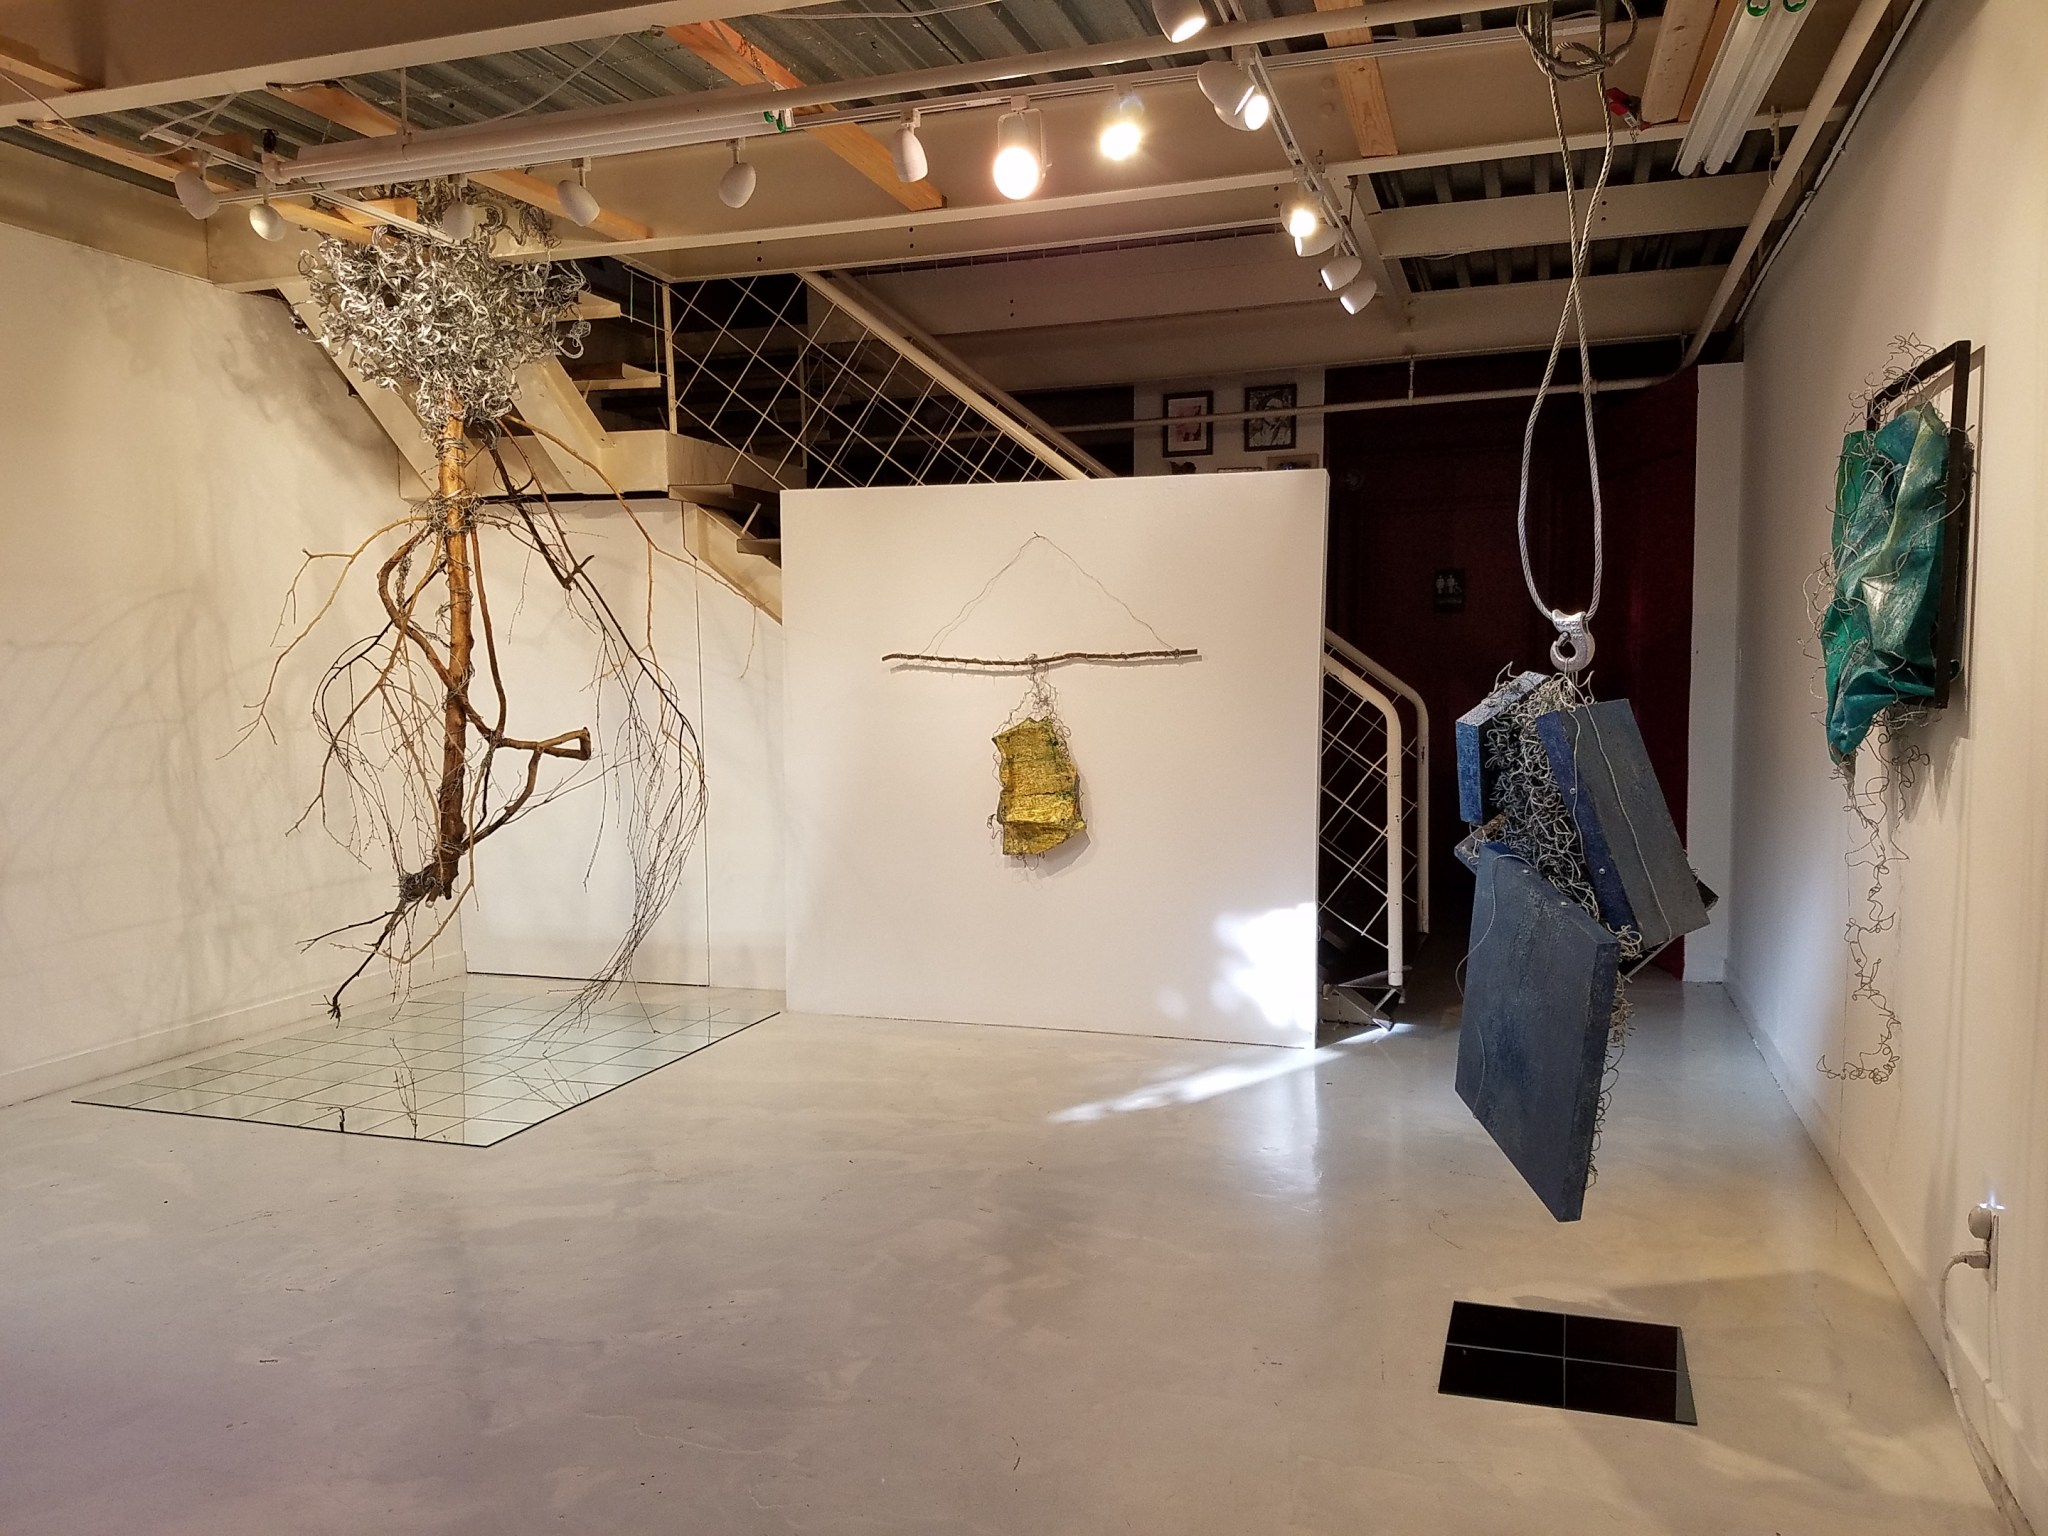 Virtual | Alternative Art Spaces in Southern California, presented with Intersect Palm Springs